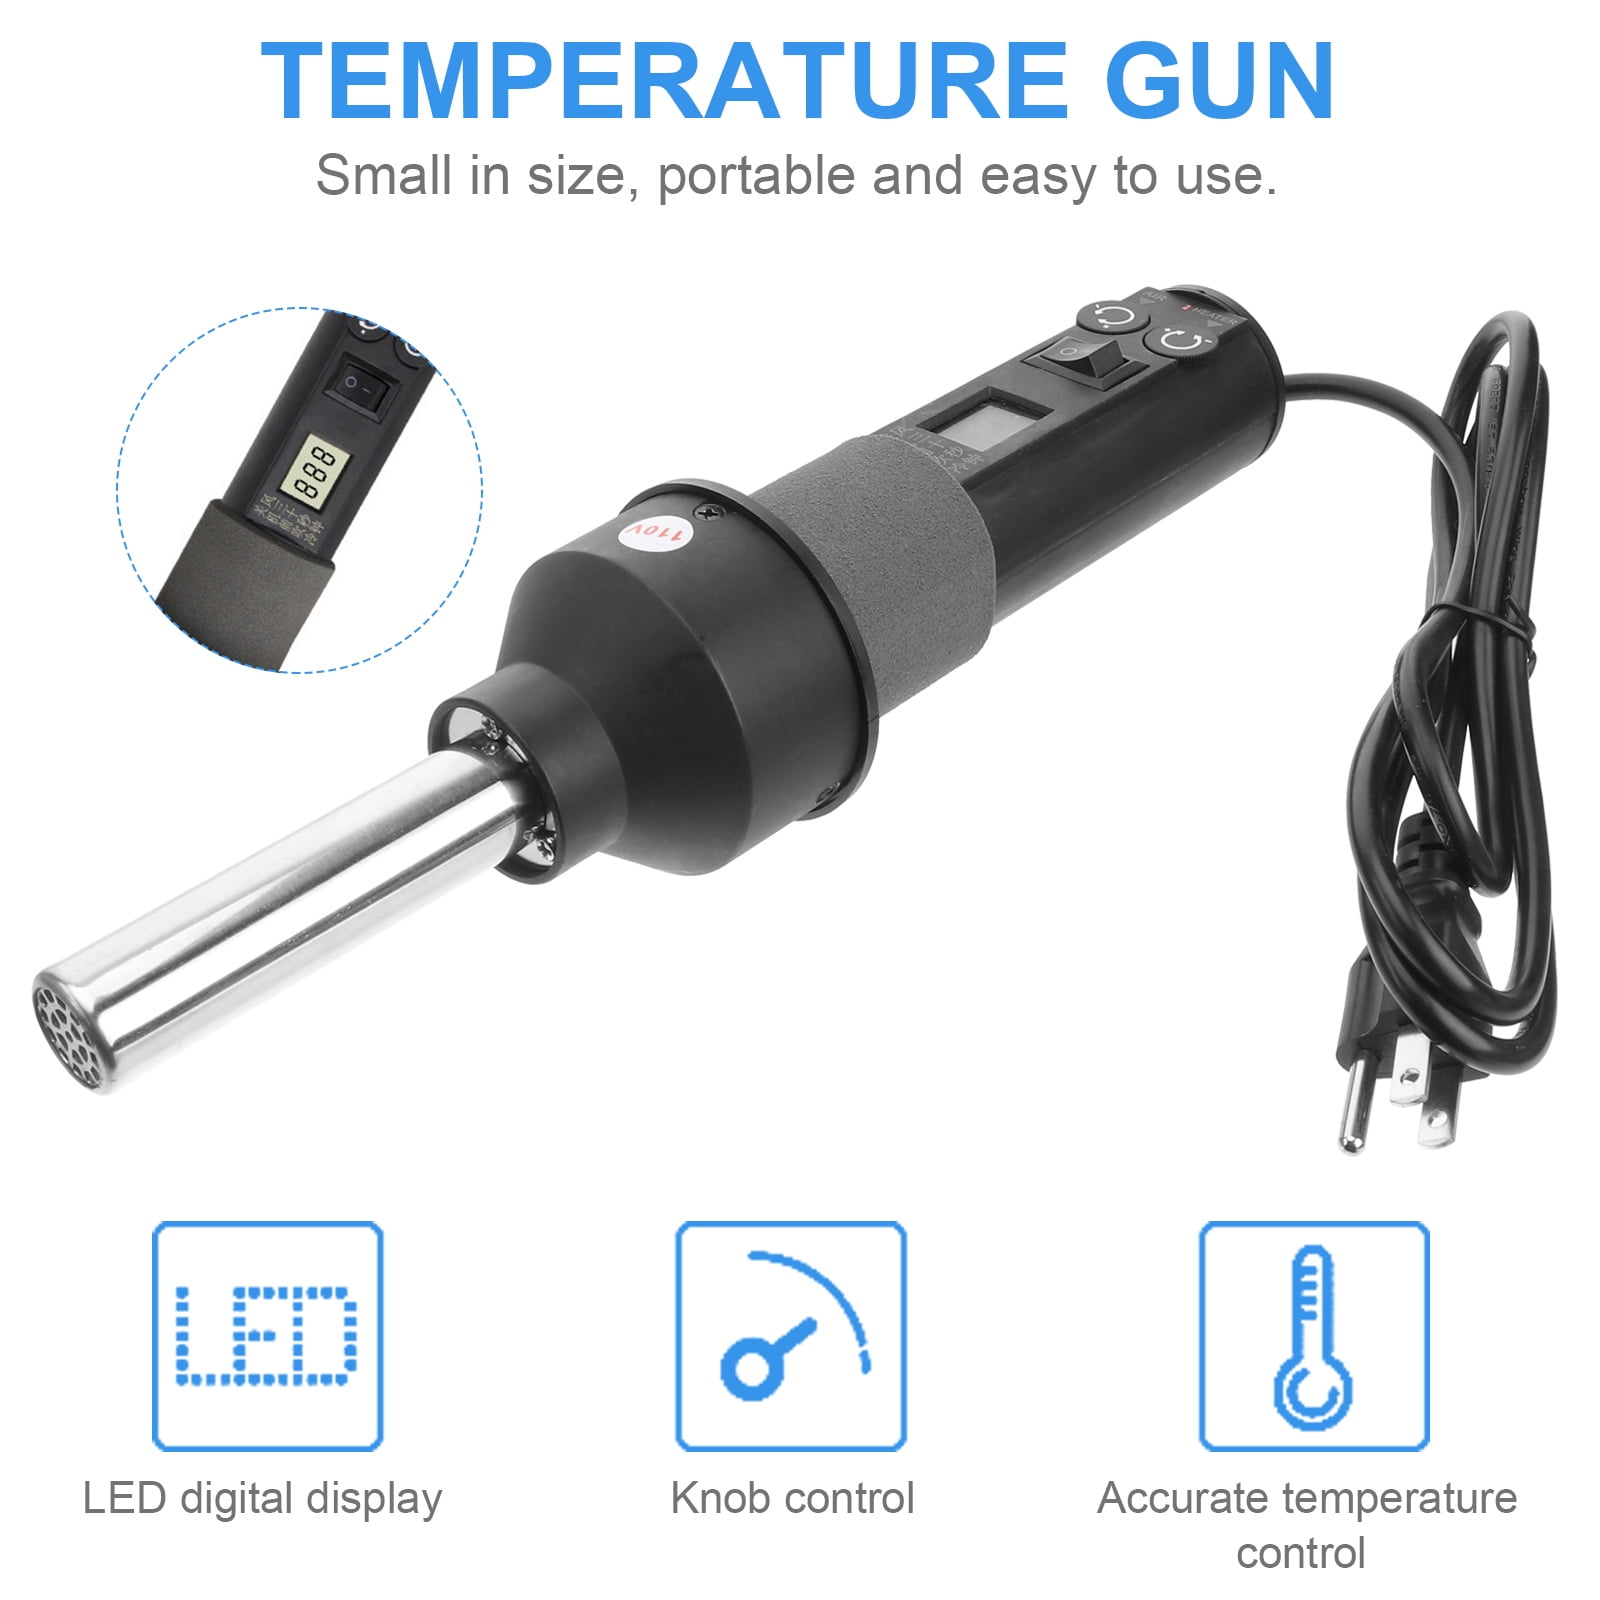 temperature heat gun 110V 430W LCD Electronic Heat Hot Air Desoldering  Soldering Station with Nozzles Kit (US Plug)